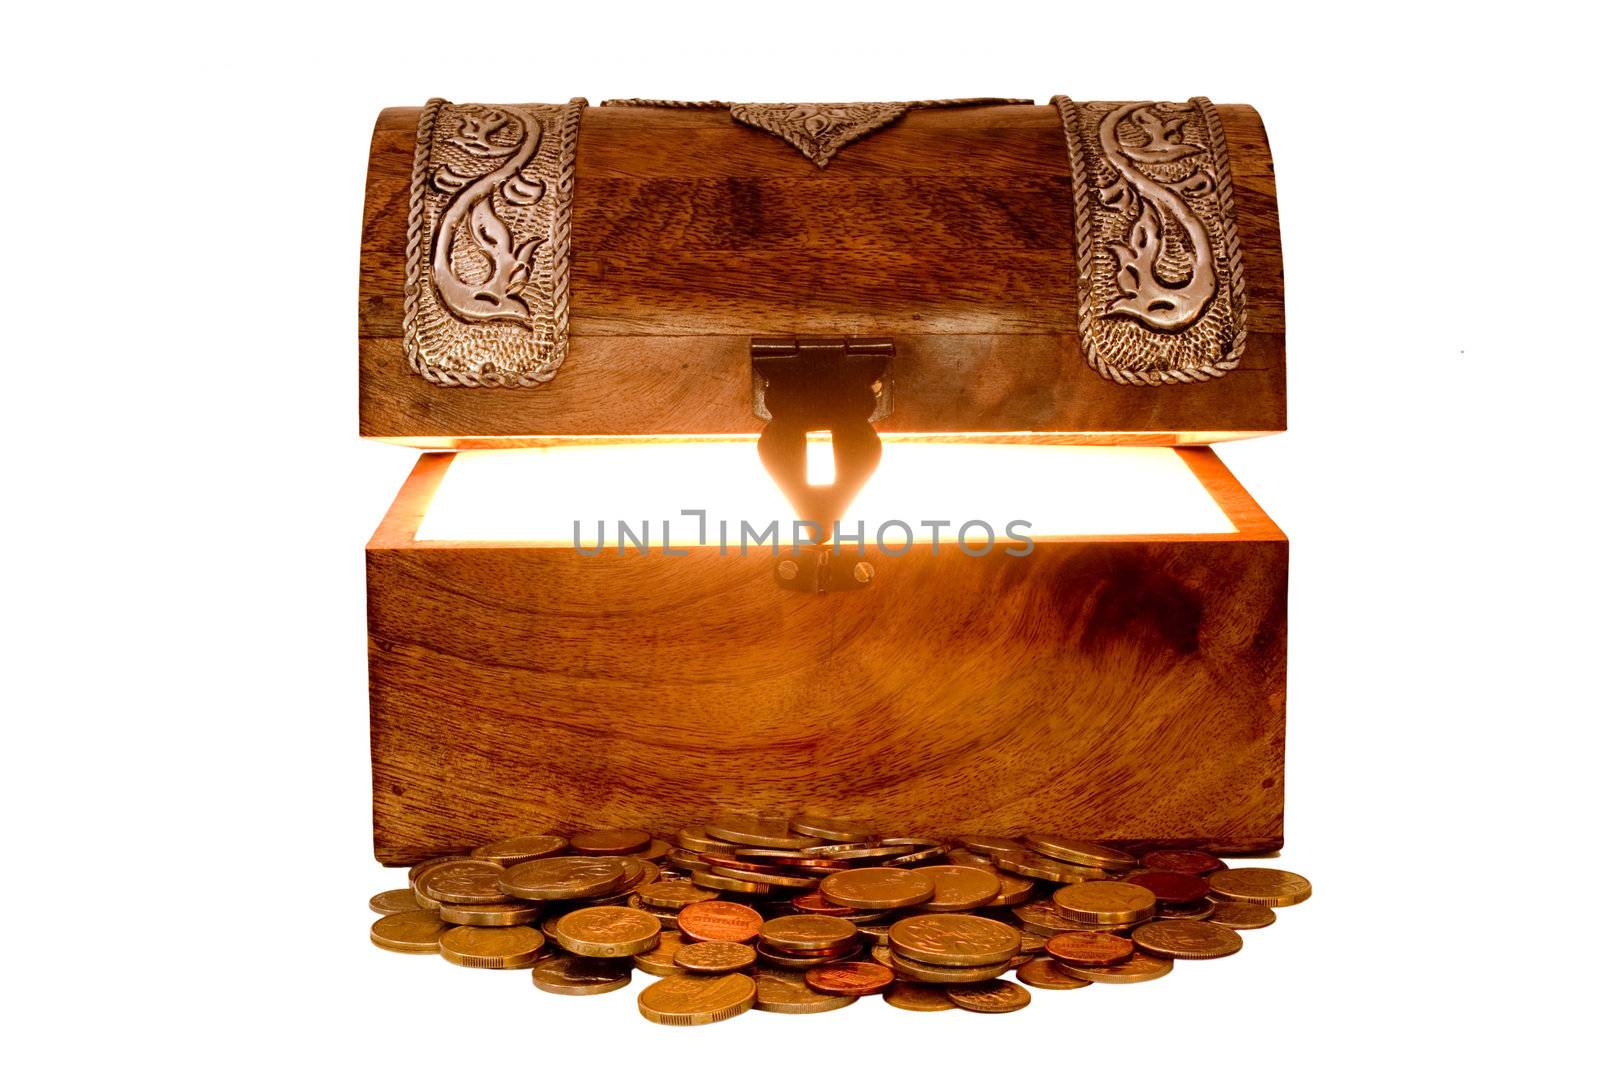 Treasure Chest and Money by Travelling-light